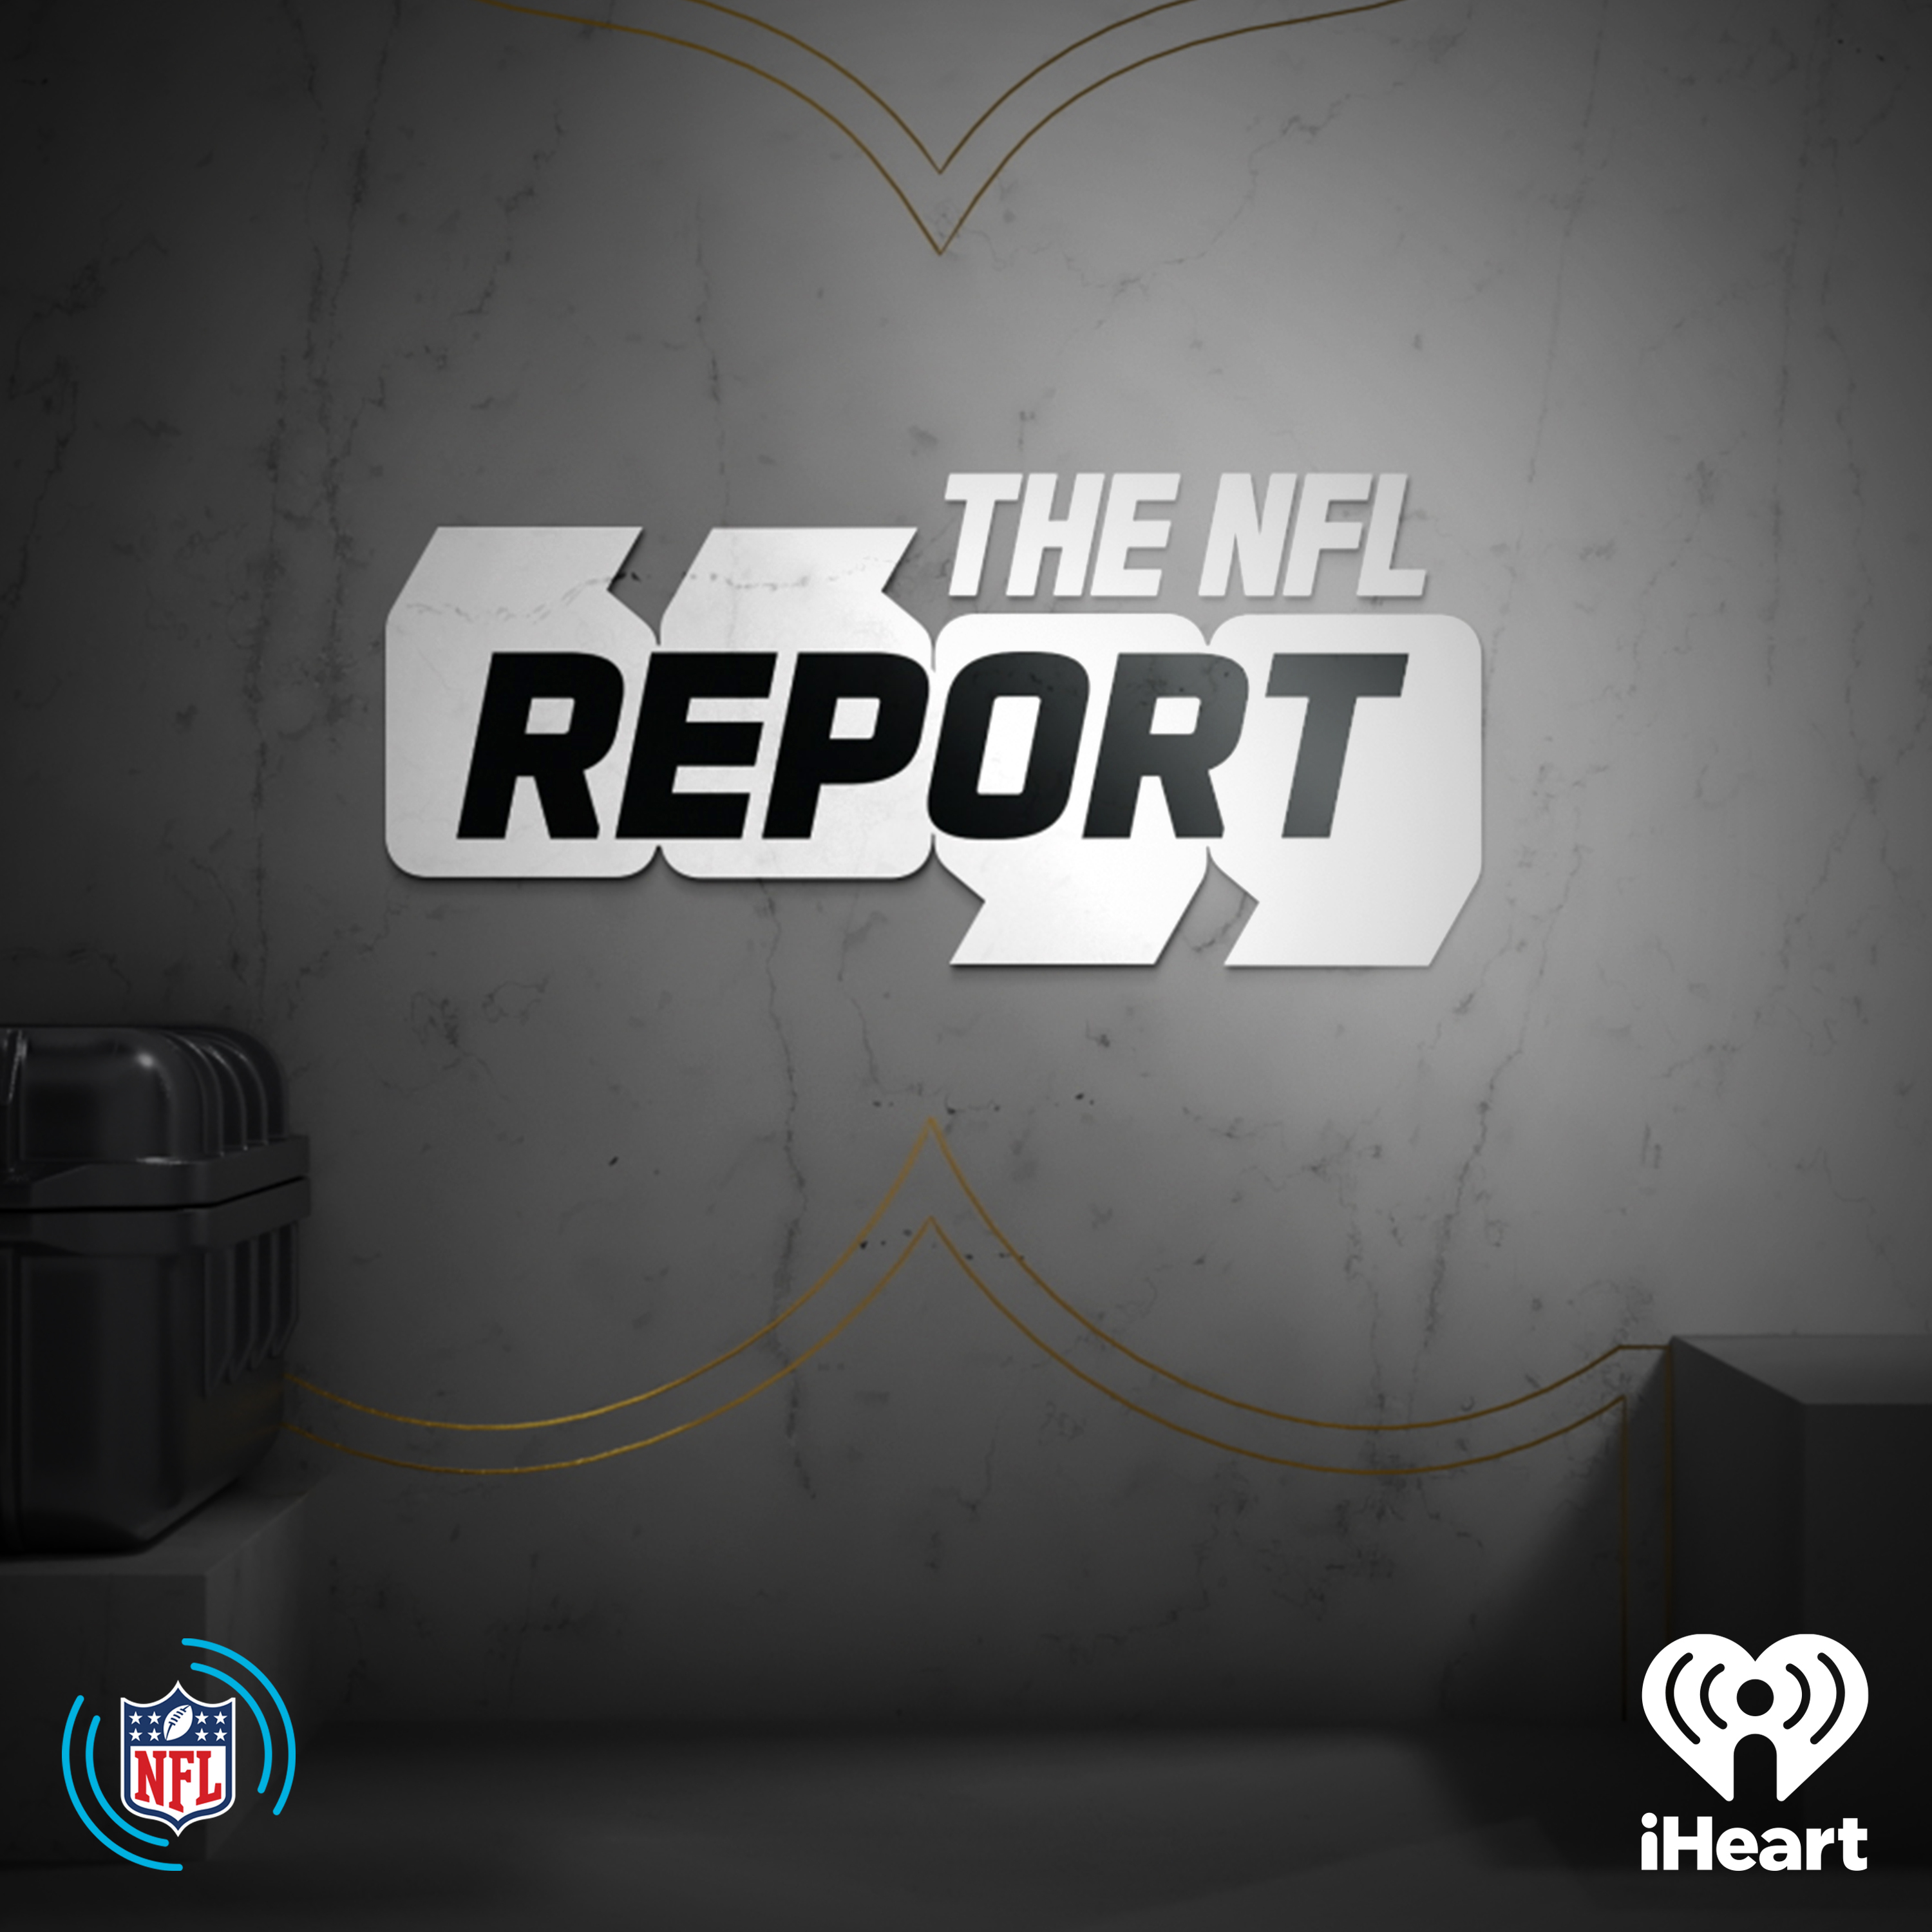 The NFL Report: Bigger News - Chiefs Flaws or Eagles Flaws More Concerning Down the Stretch?